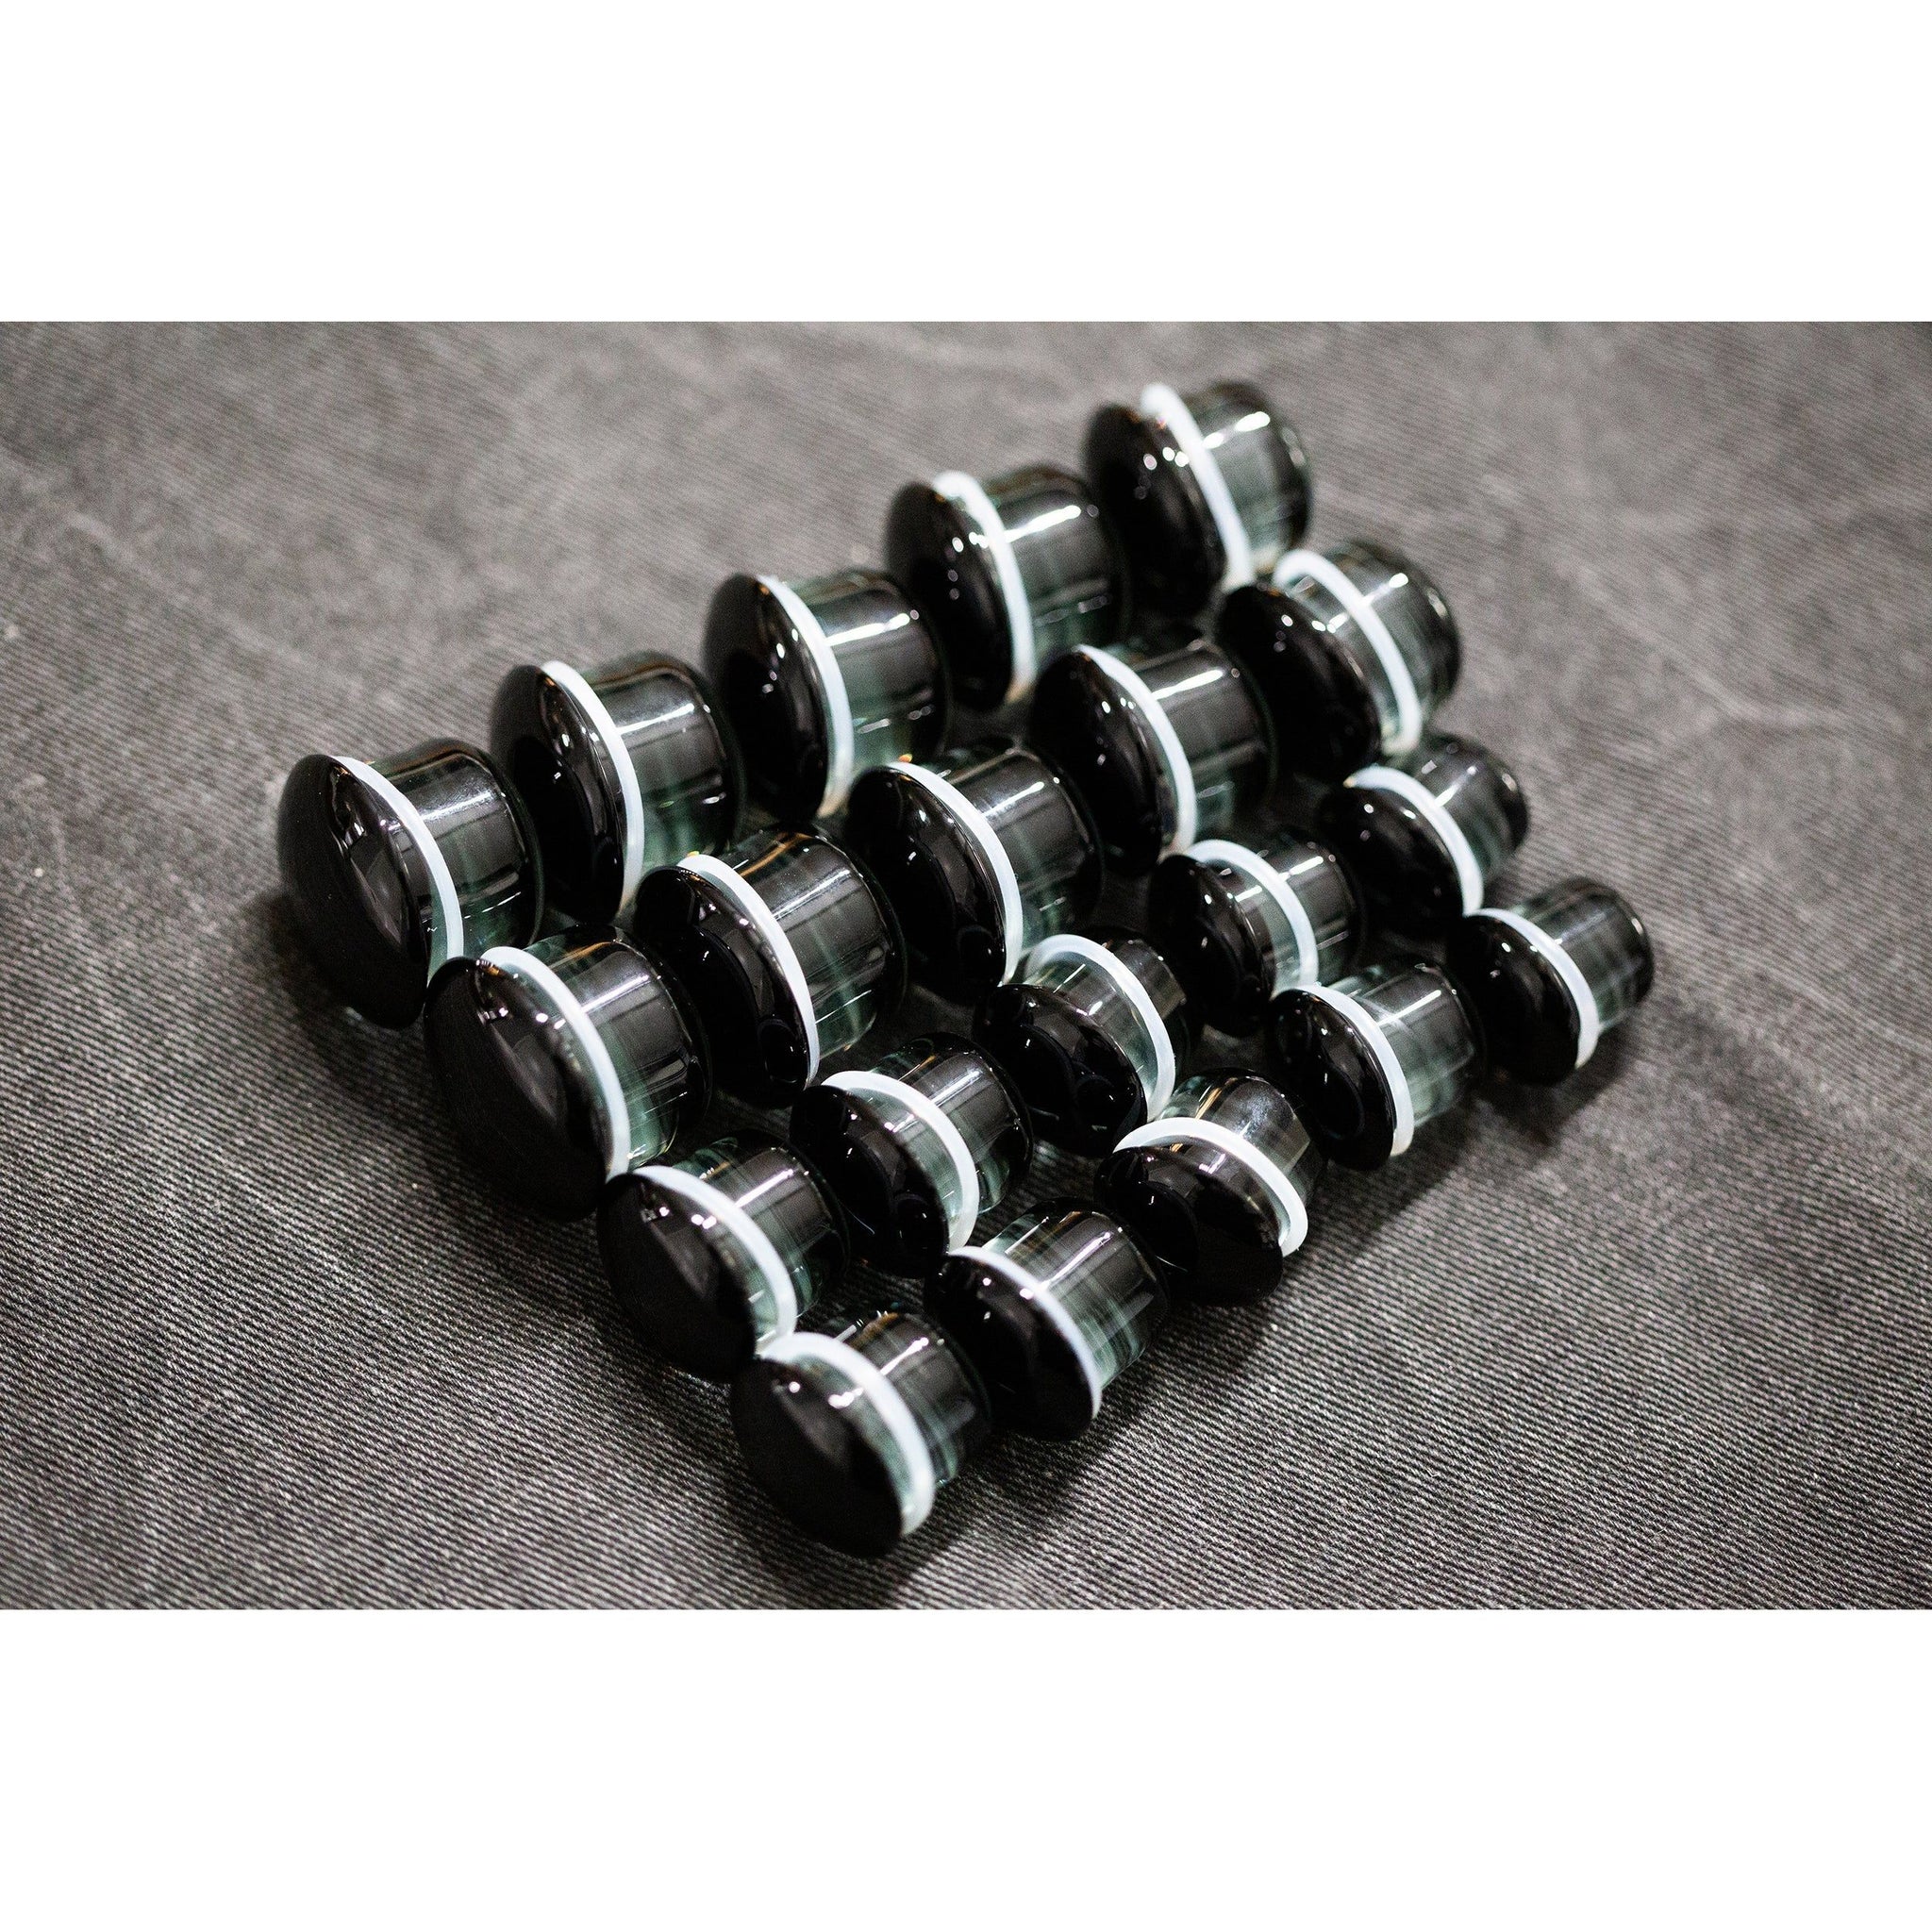 Glass Single Flared Plug Pair, Black:  2mm to 25mm for Dead Stretching or Daily Wear - 70 Knots